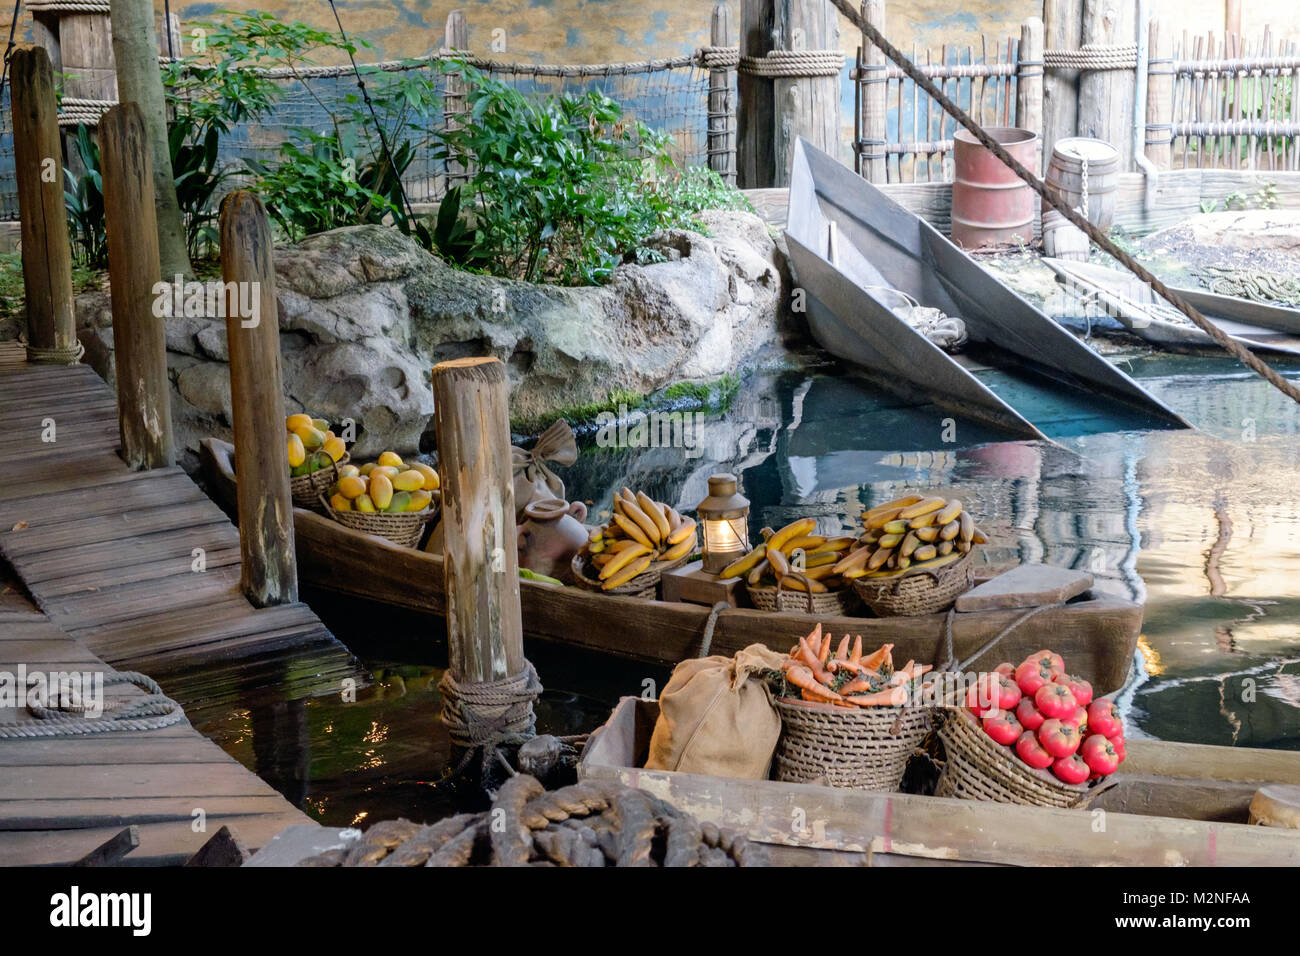 Two river boats with baskets of fruit and vegetables in the water, docked at the pier. Old wooden dock and pilings. Two empty boats in background. Pic Stock Photo